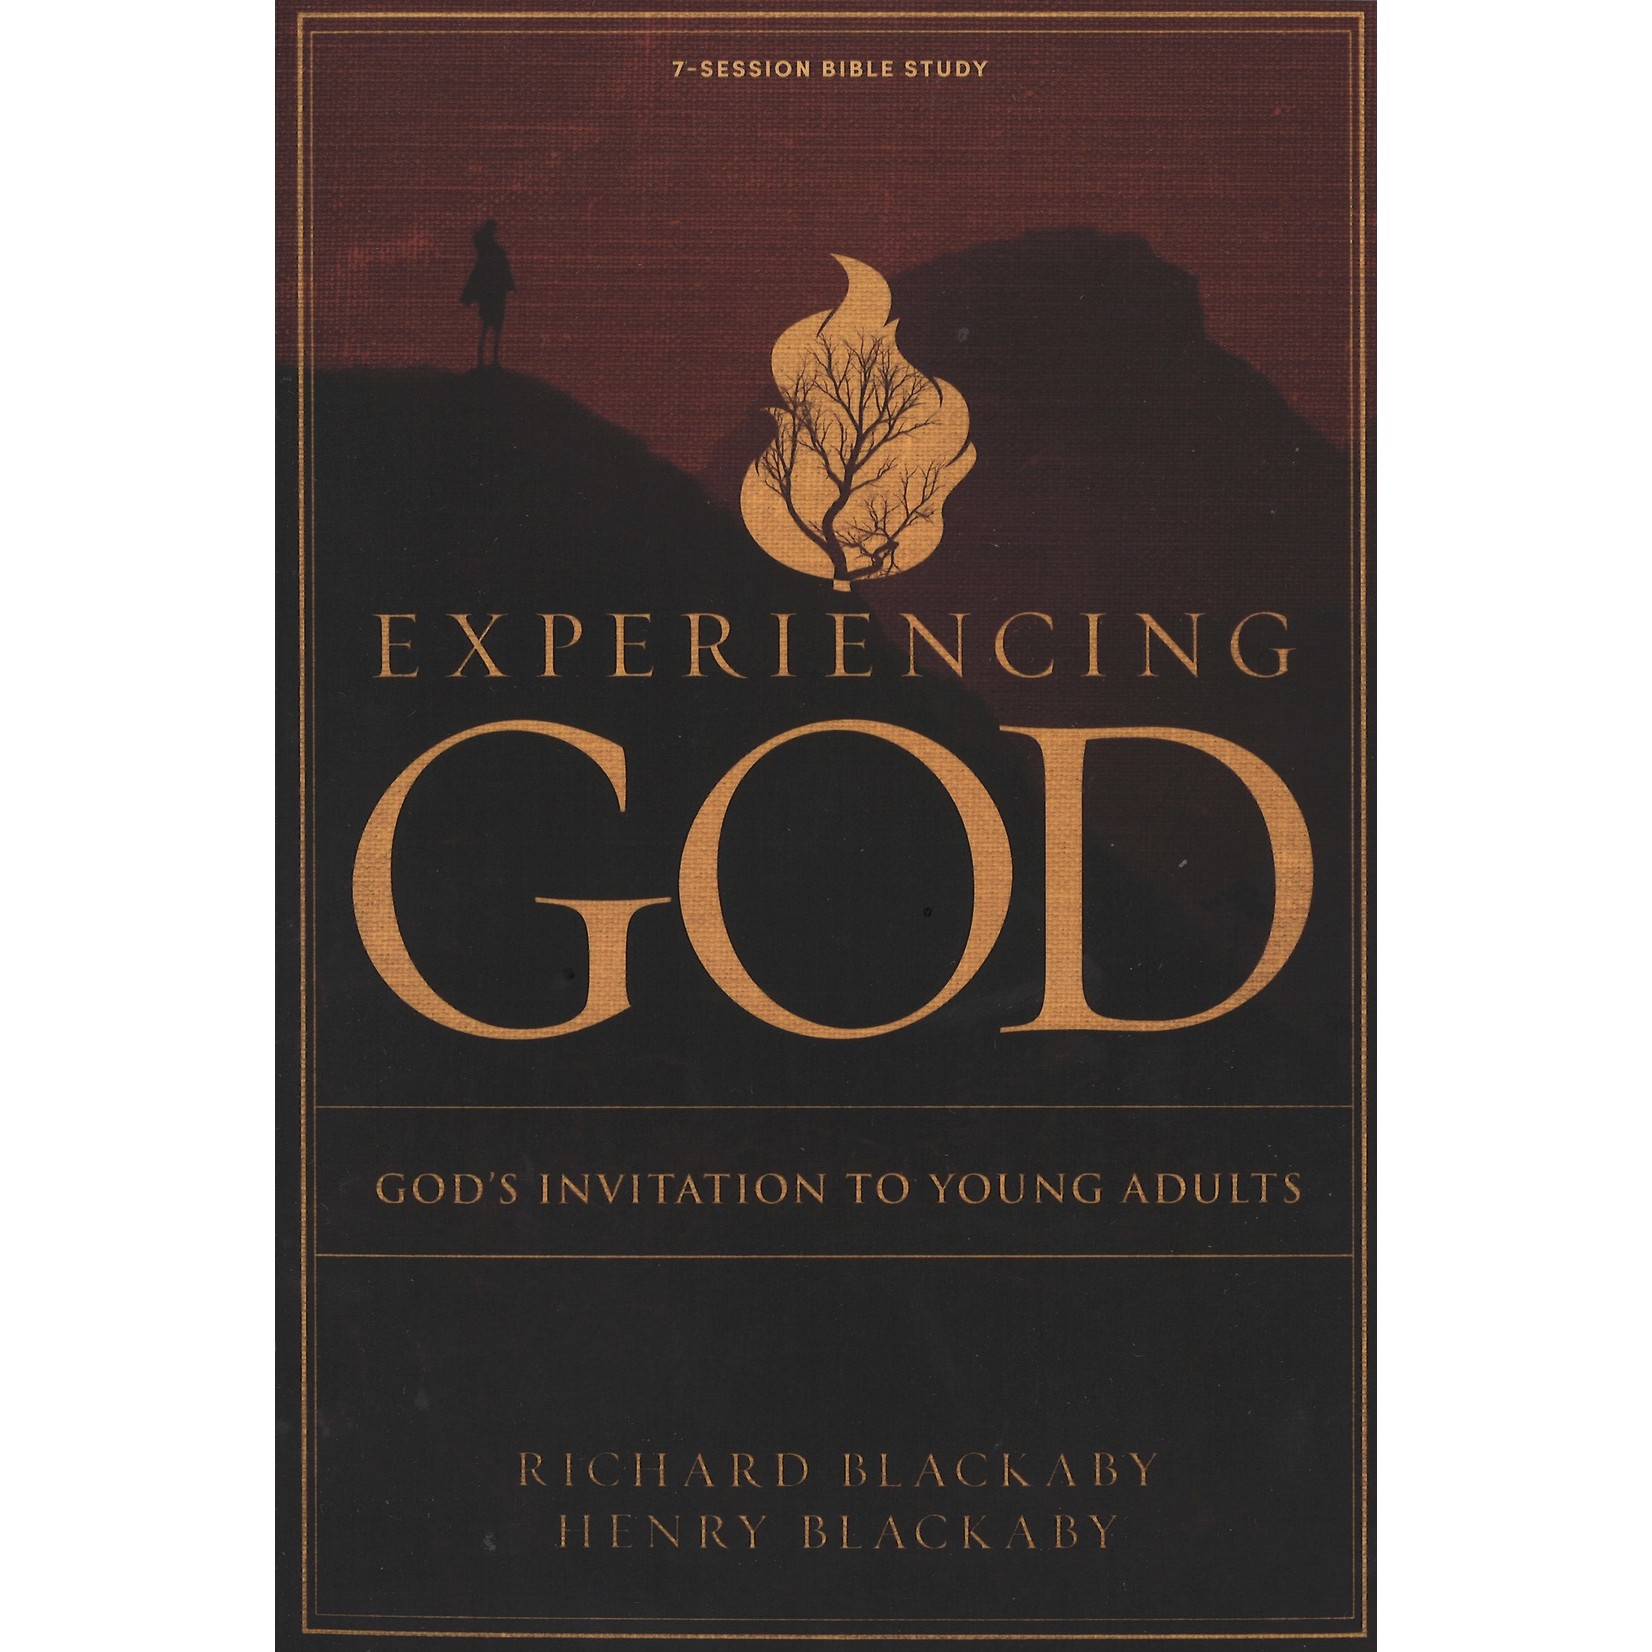 EXPERIENCING GOD: GOD'S INVITATION TO YOUNG ADULTS